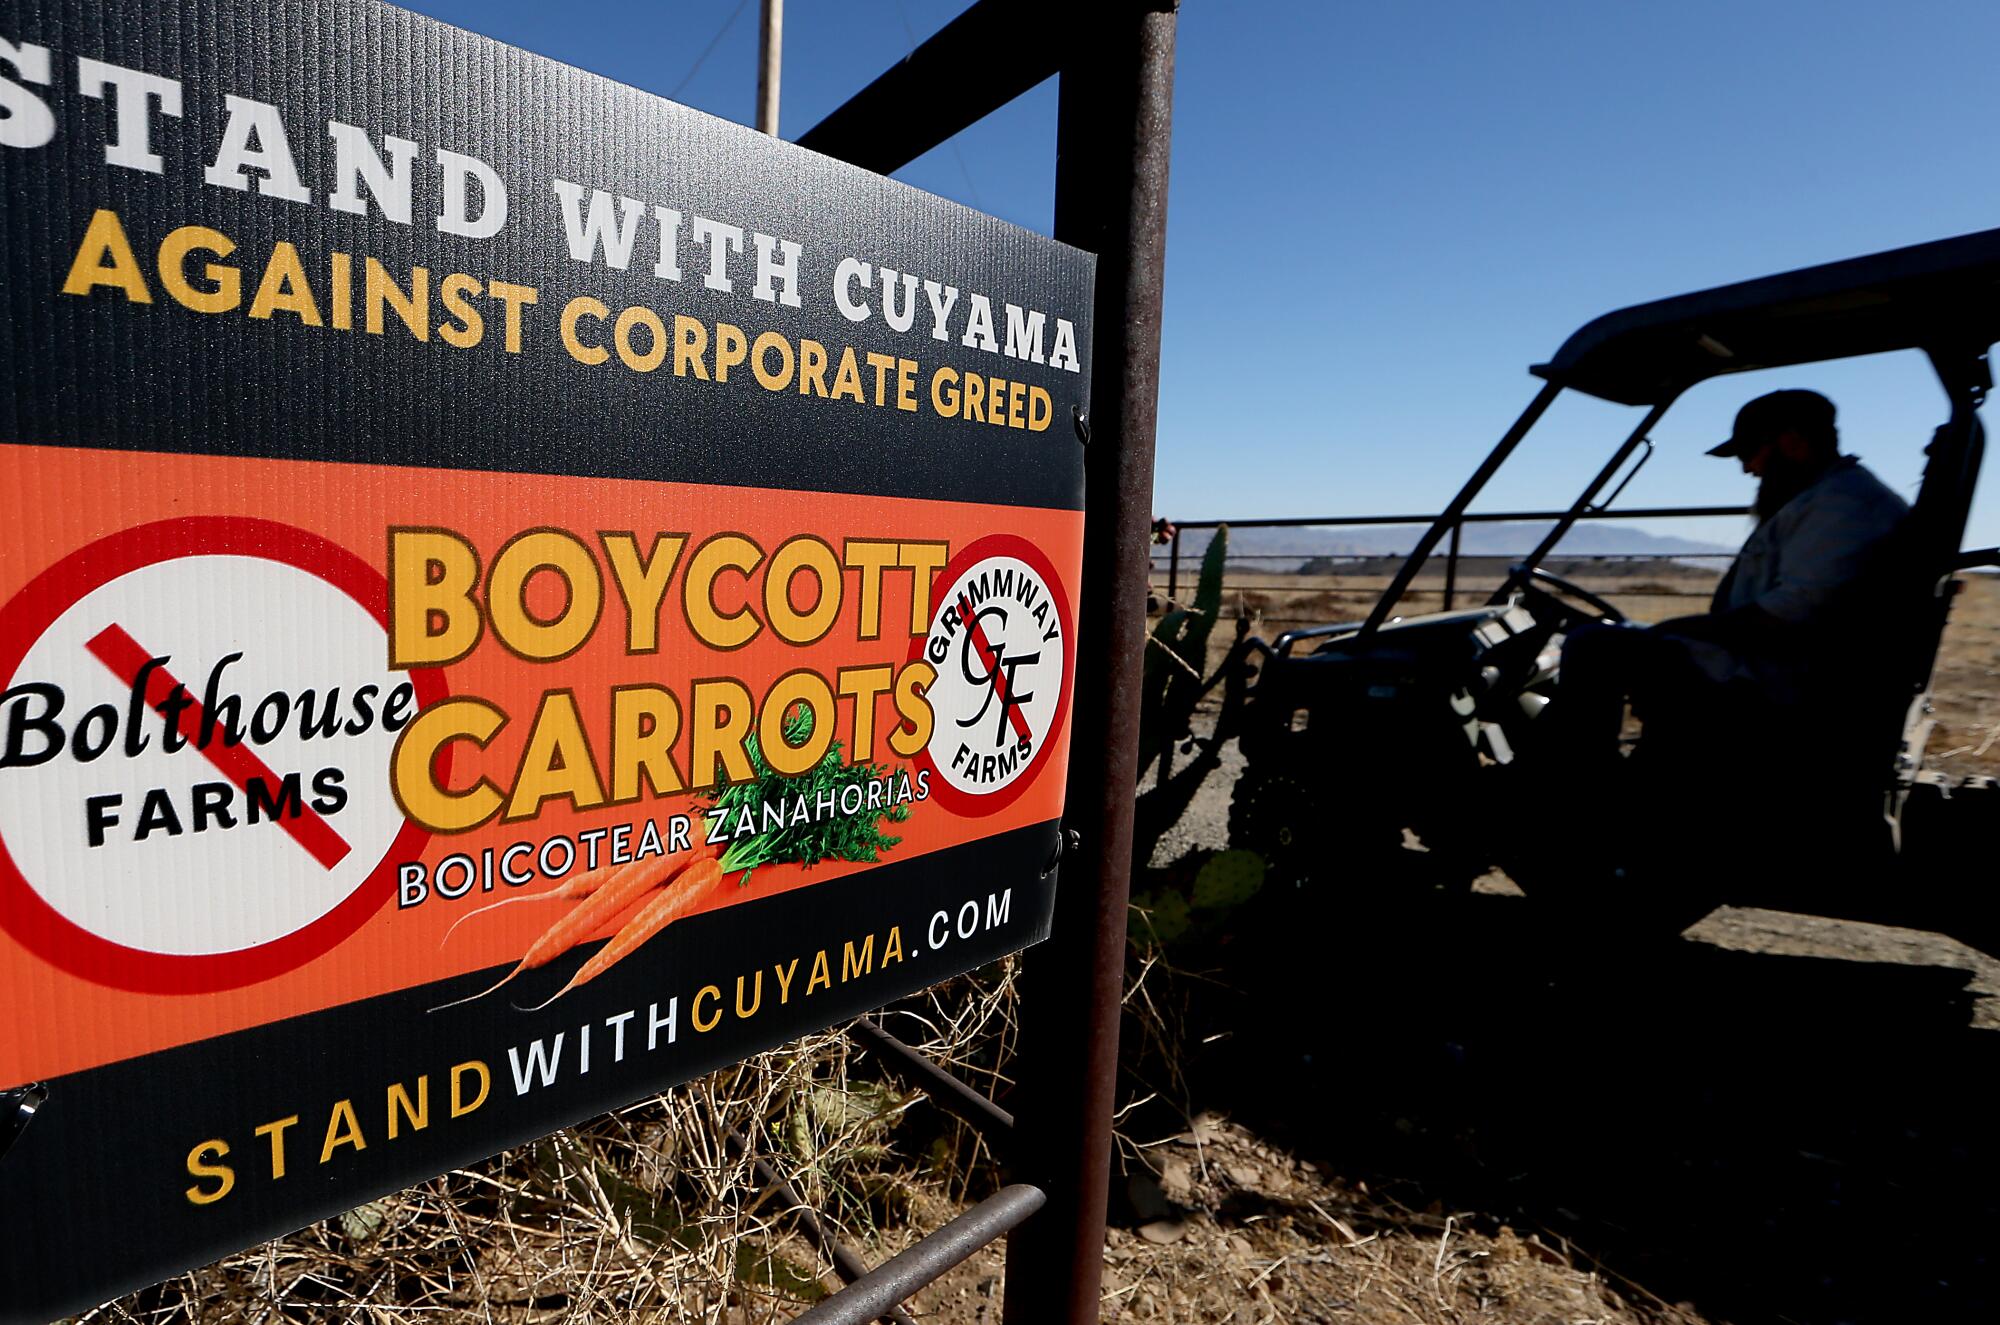 A sign reads "Boycott of carrots."